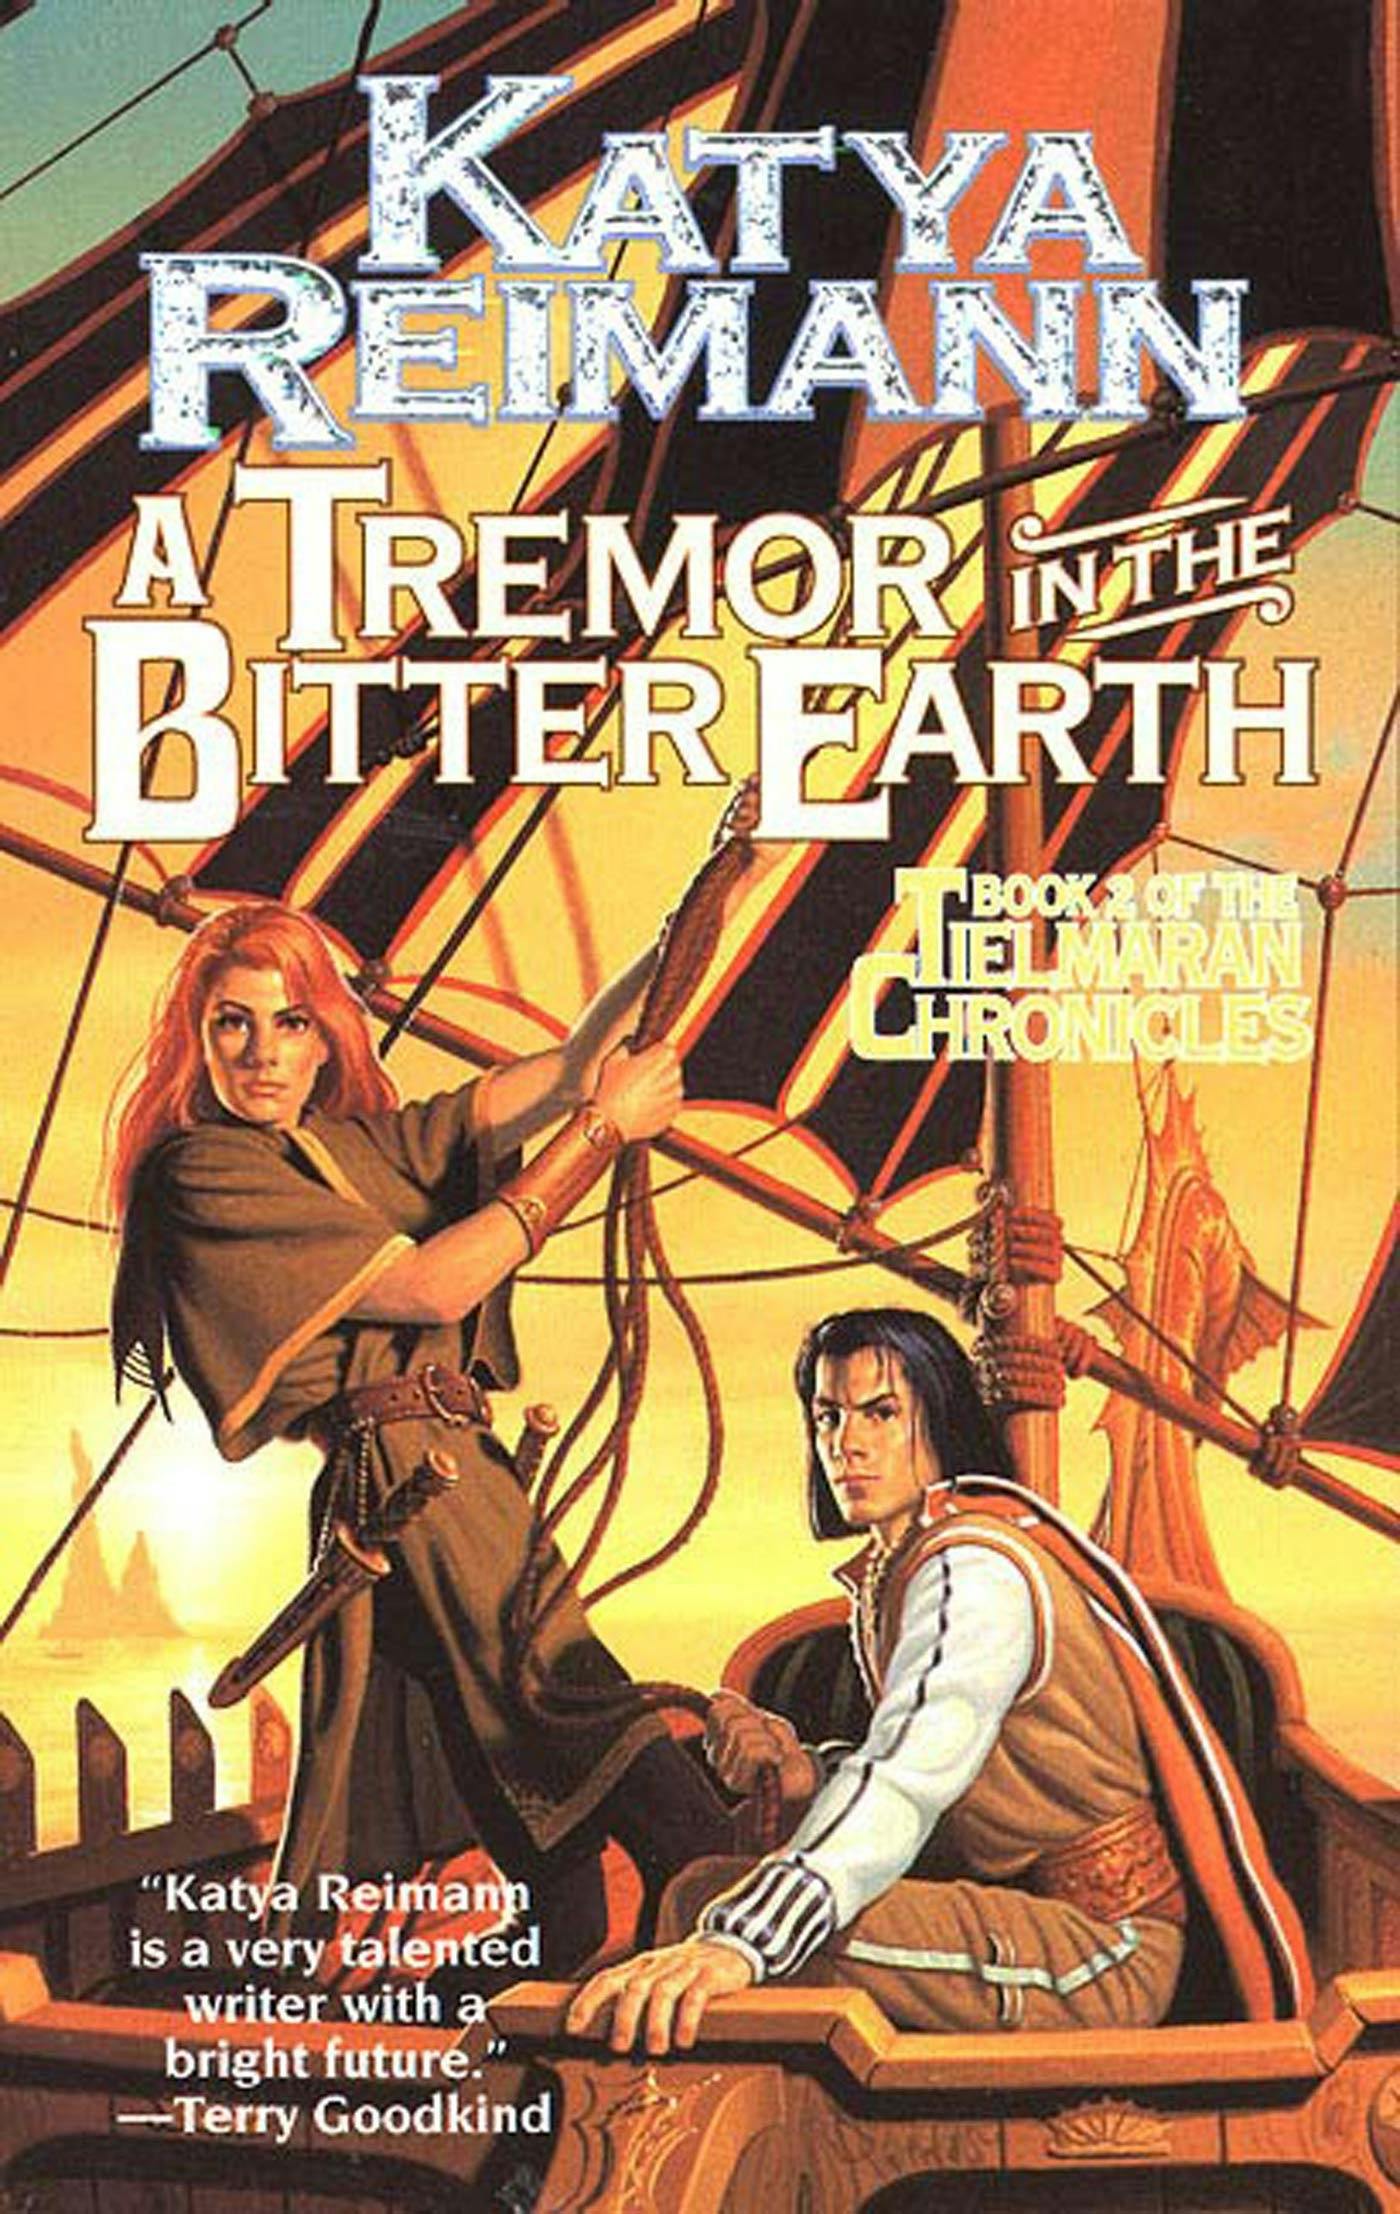 Tremor in the Bitter Earth